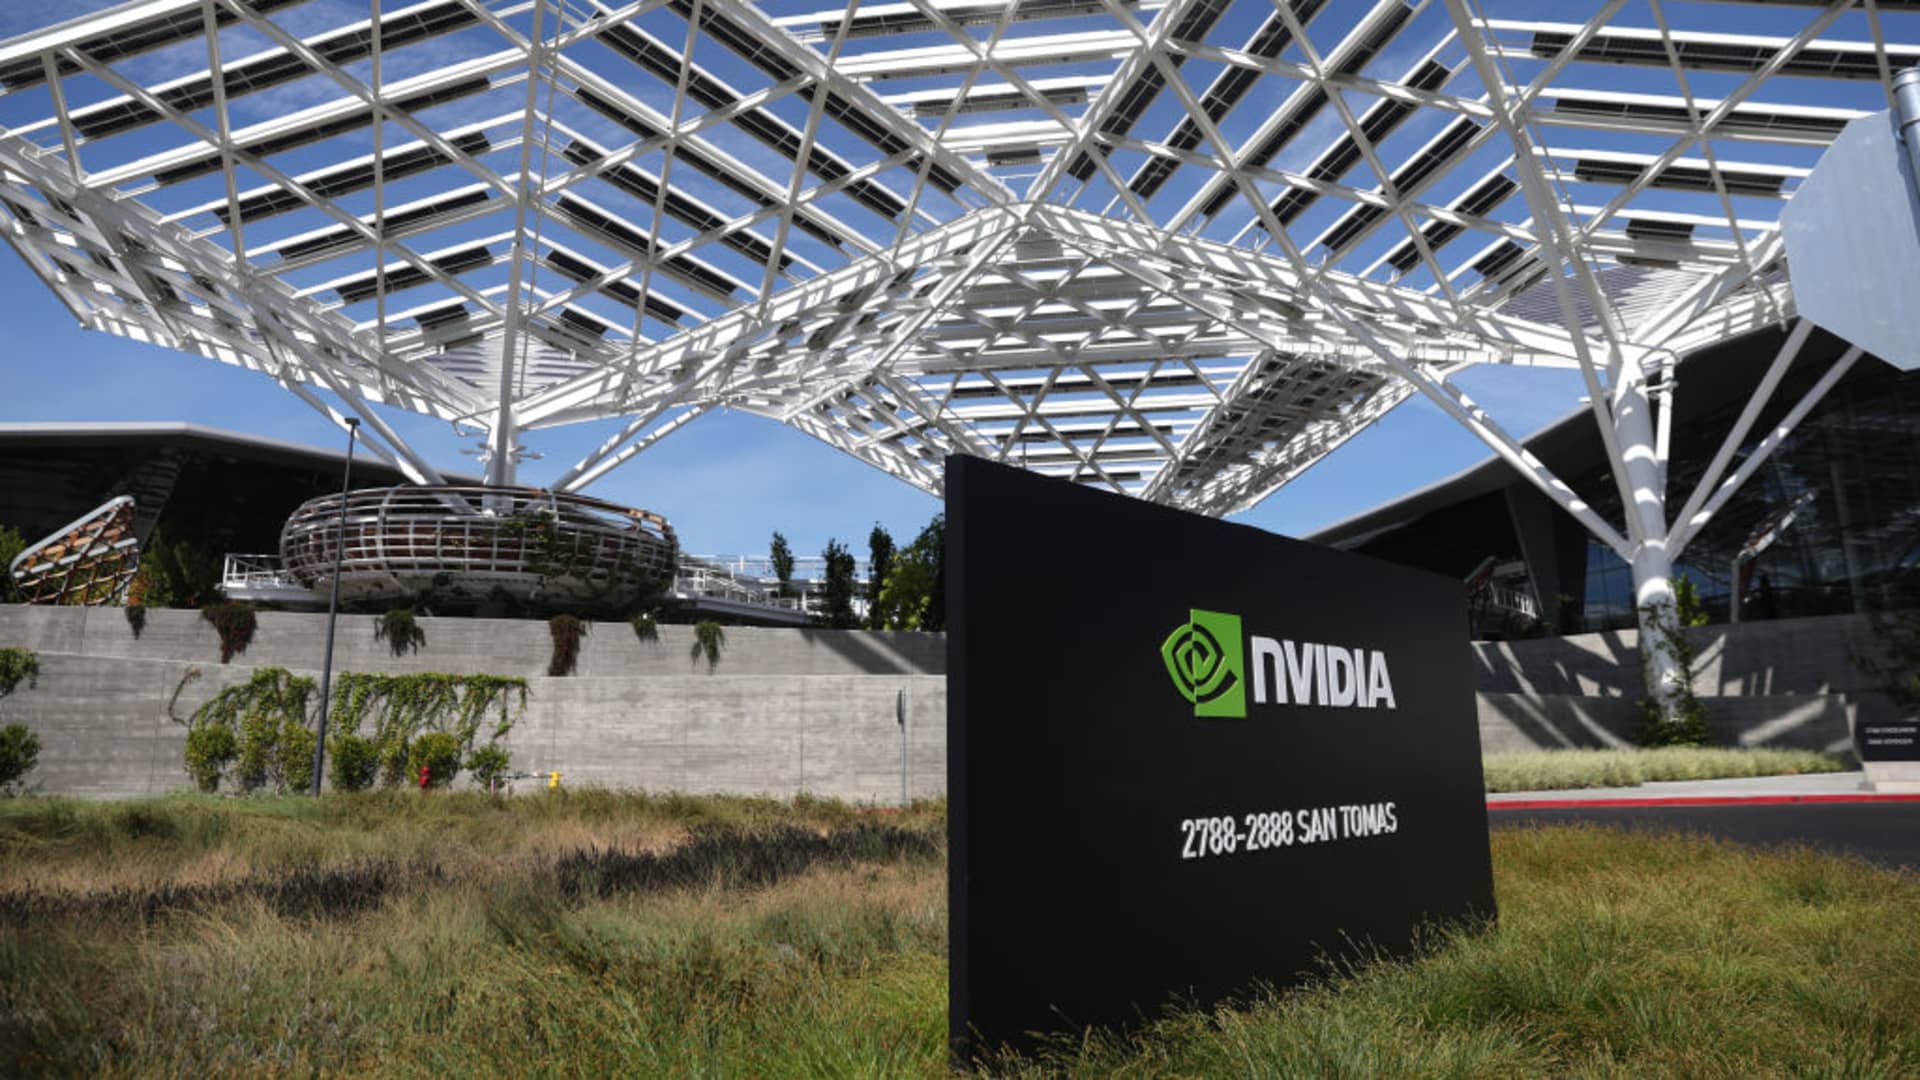 Stocks making the biggest moves premarket: Lucid, Nvidia, Dollar General, Sunrun and more